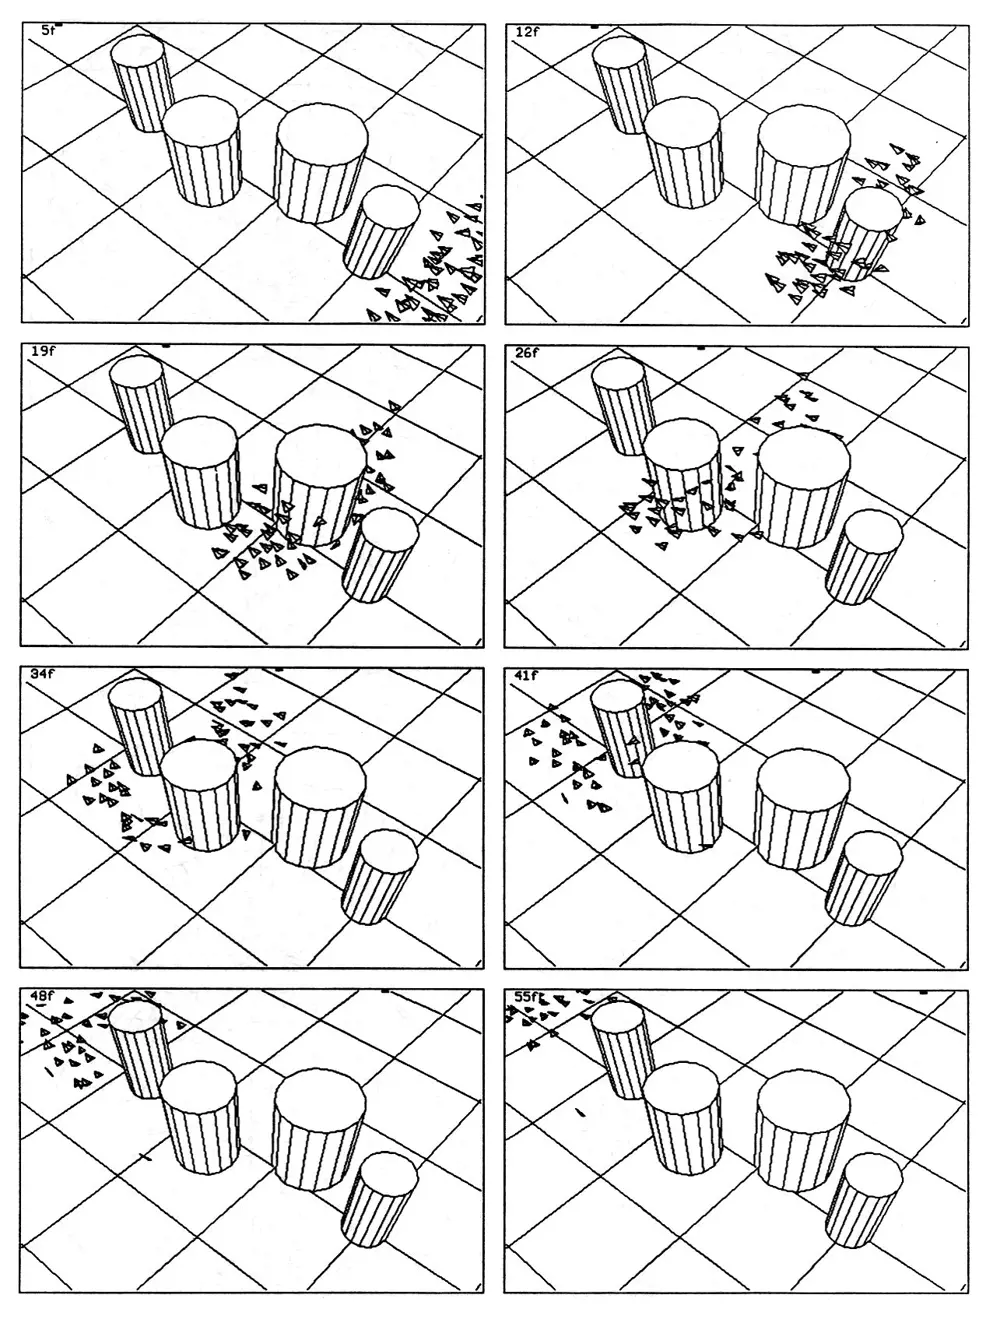 An eight figure storyboard showing step by step as a swarm of "boids" (simulated birds) navigate four consecutive columns acting as obstacles.